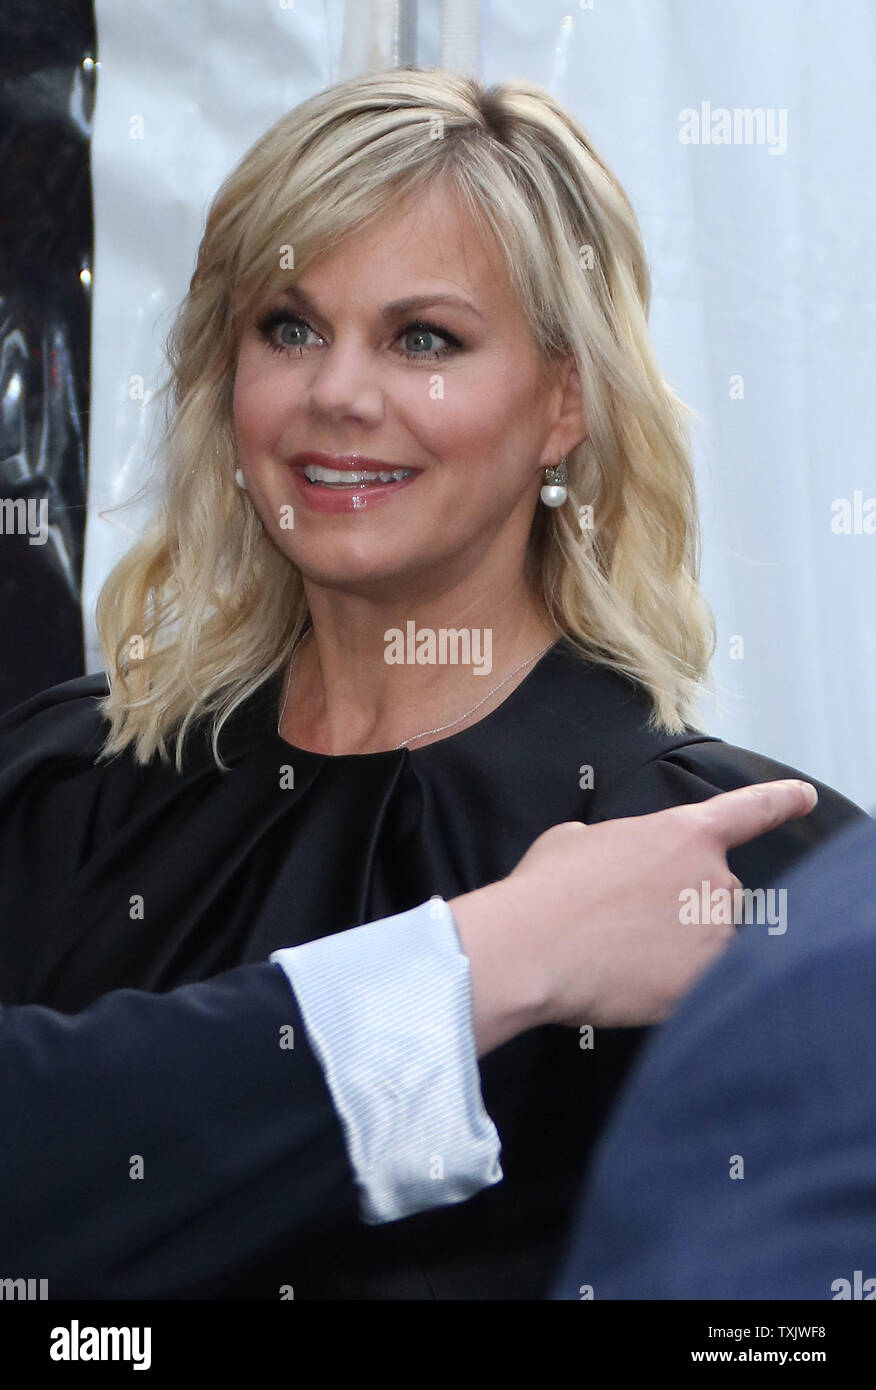 Gretchen Carlson High Resolution Stock Photography And Images Alamy